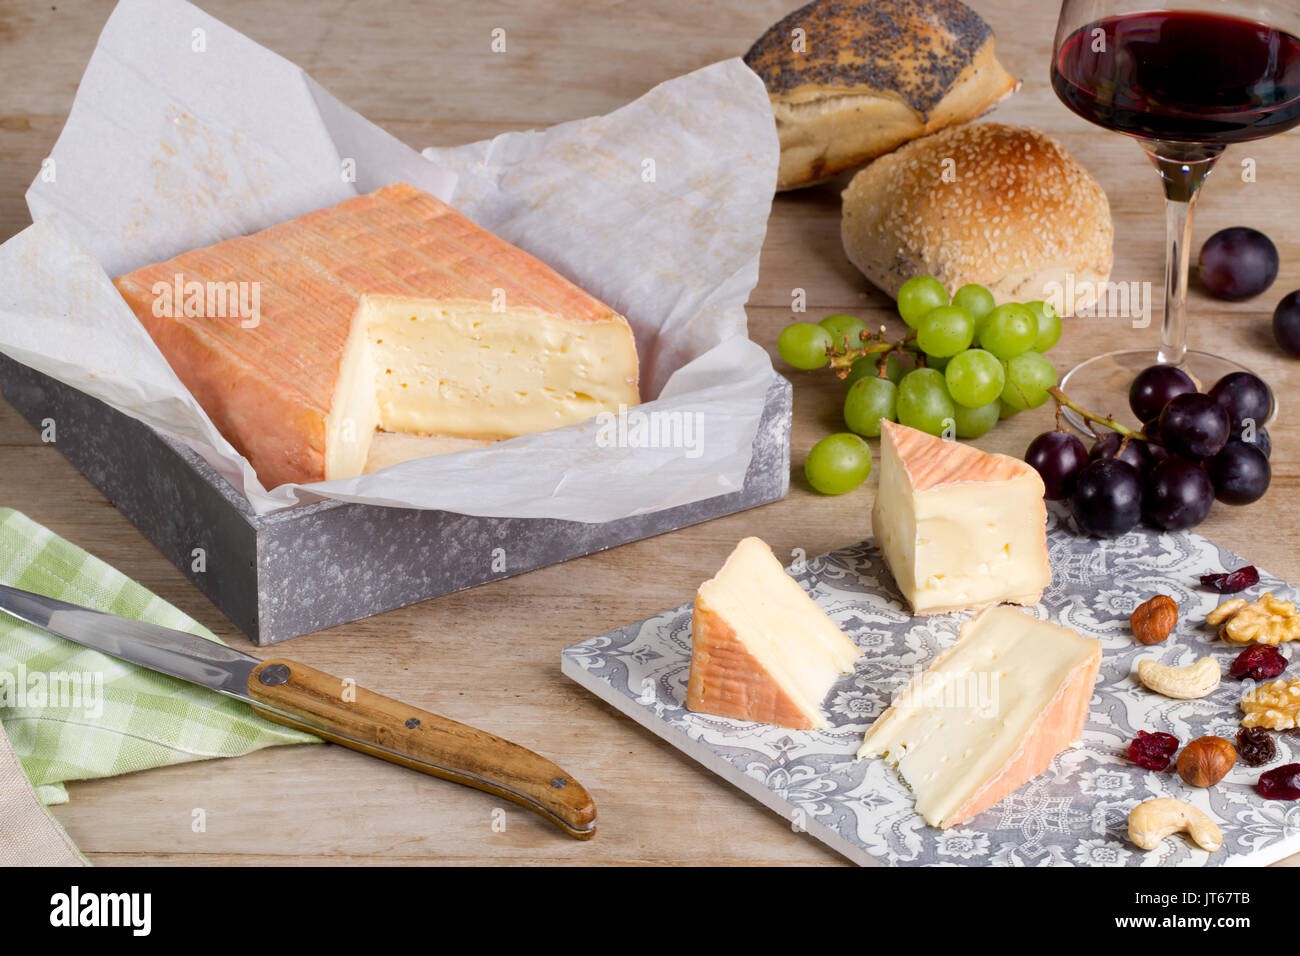 Cheese from northern France: Maroilles cheese, unpasteurized farm cheese, soft cheese with an orangey-red washed rind. Stock Photo